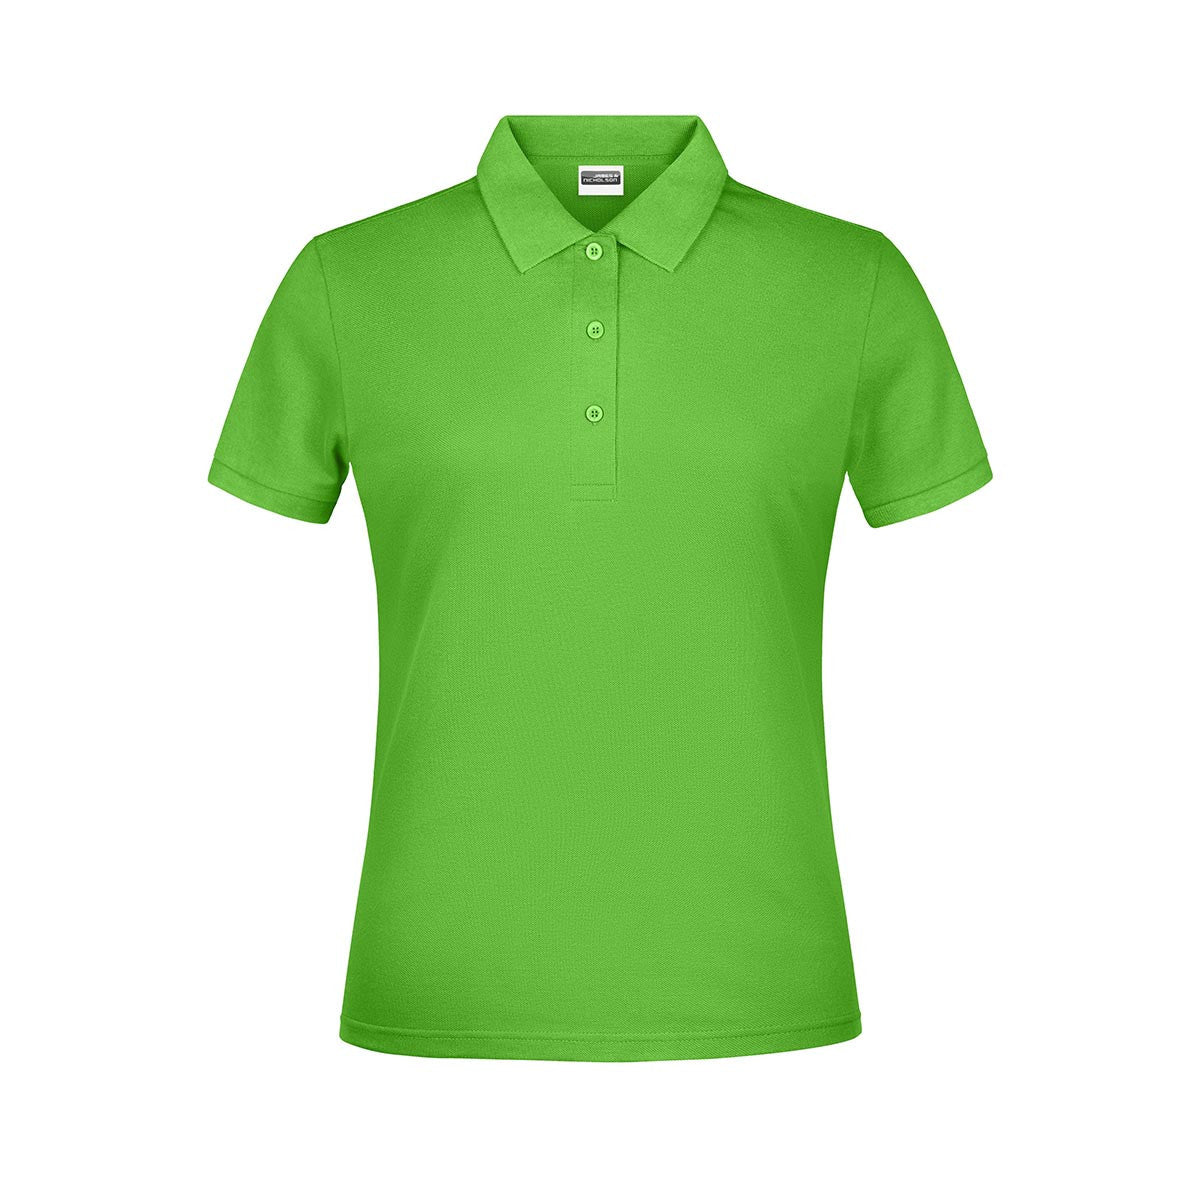 Value Polo-Shirt (Women) (Muster)